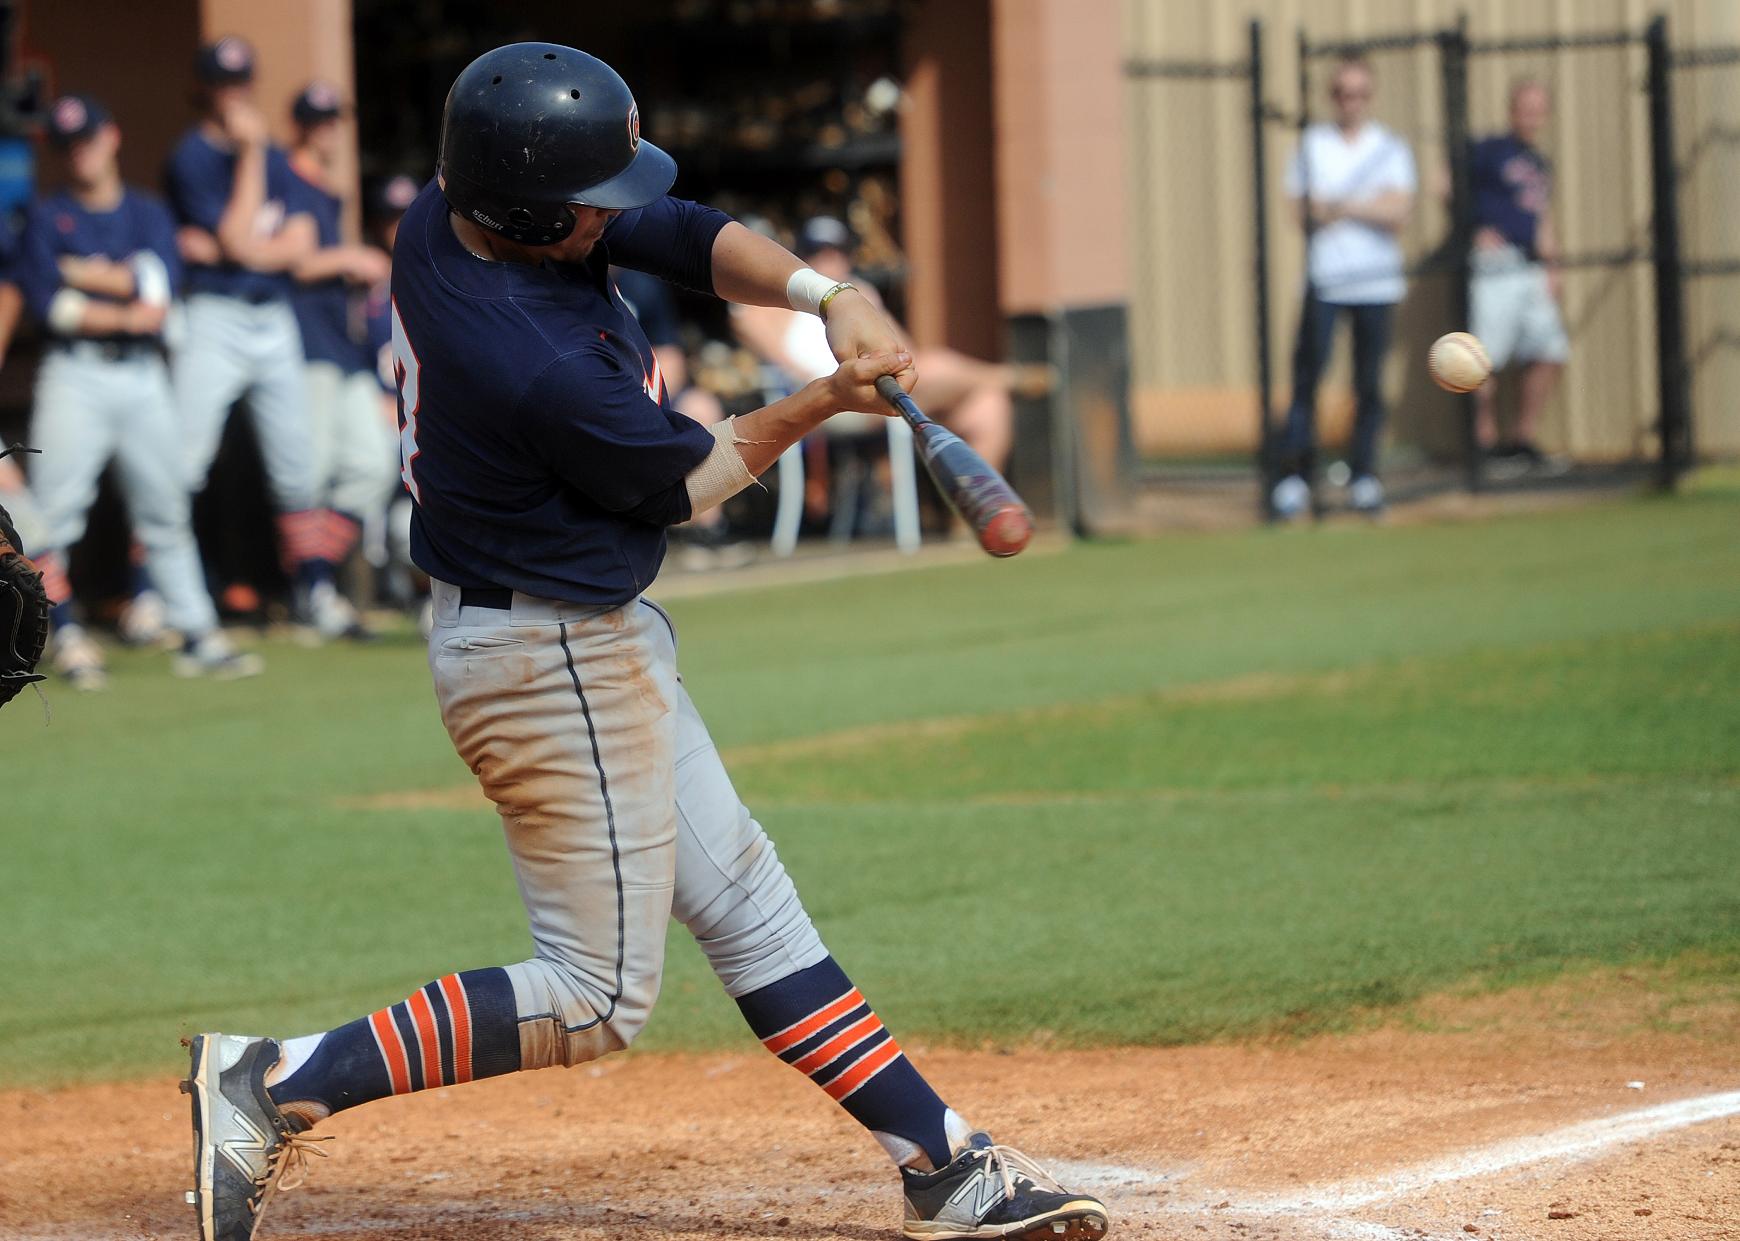 Wingate seizes game one at home versus Eagles